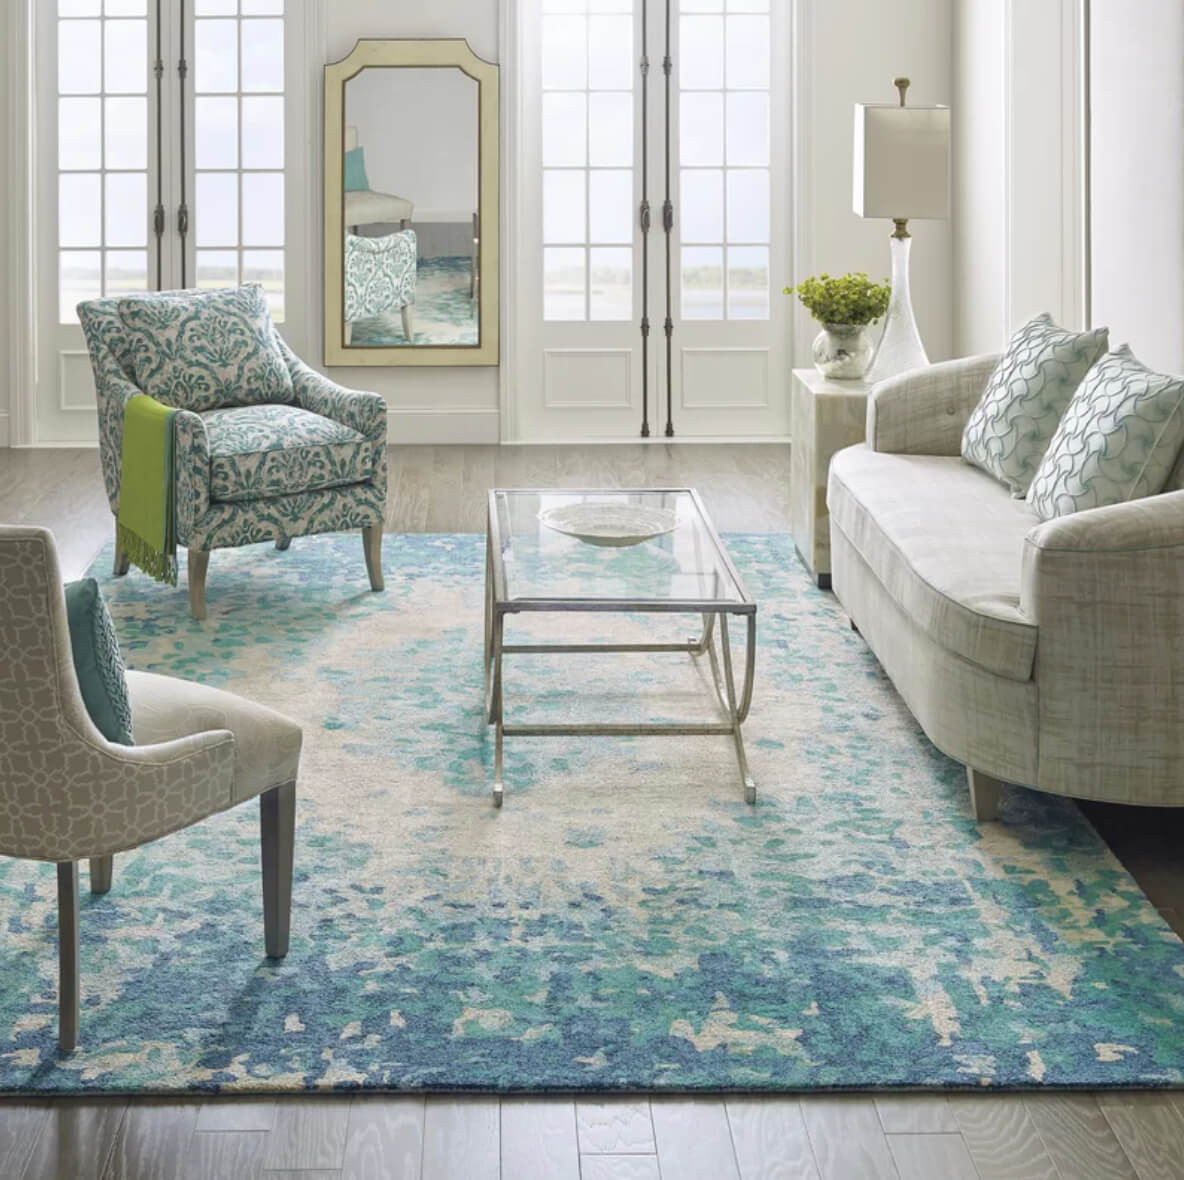 Living Room Area Rug Ideas
 12 Living Room Rug Ideas That Will Change Everything